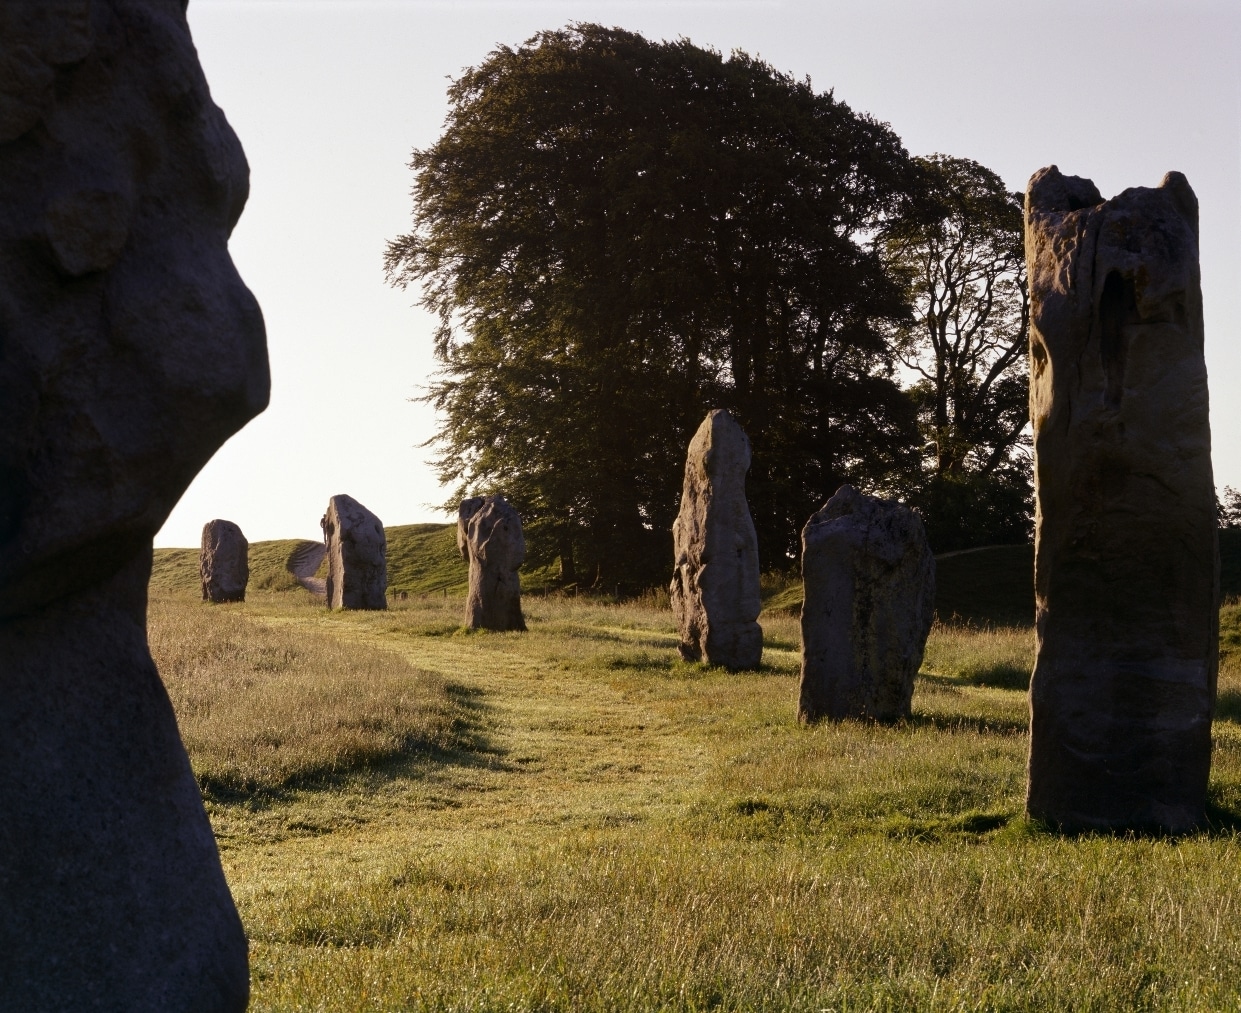 from Rocking Stone Circles at Stonehenge and Avebury on Slow Down, See More